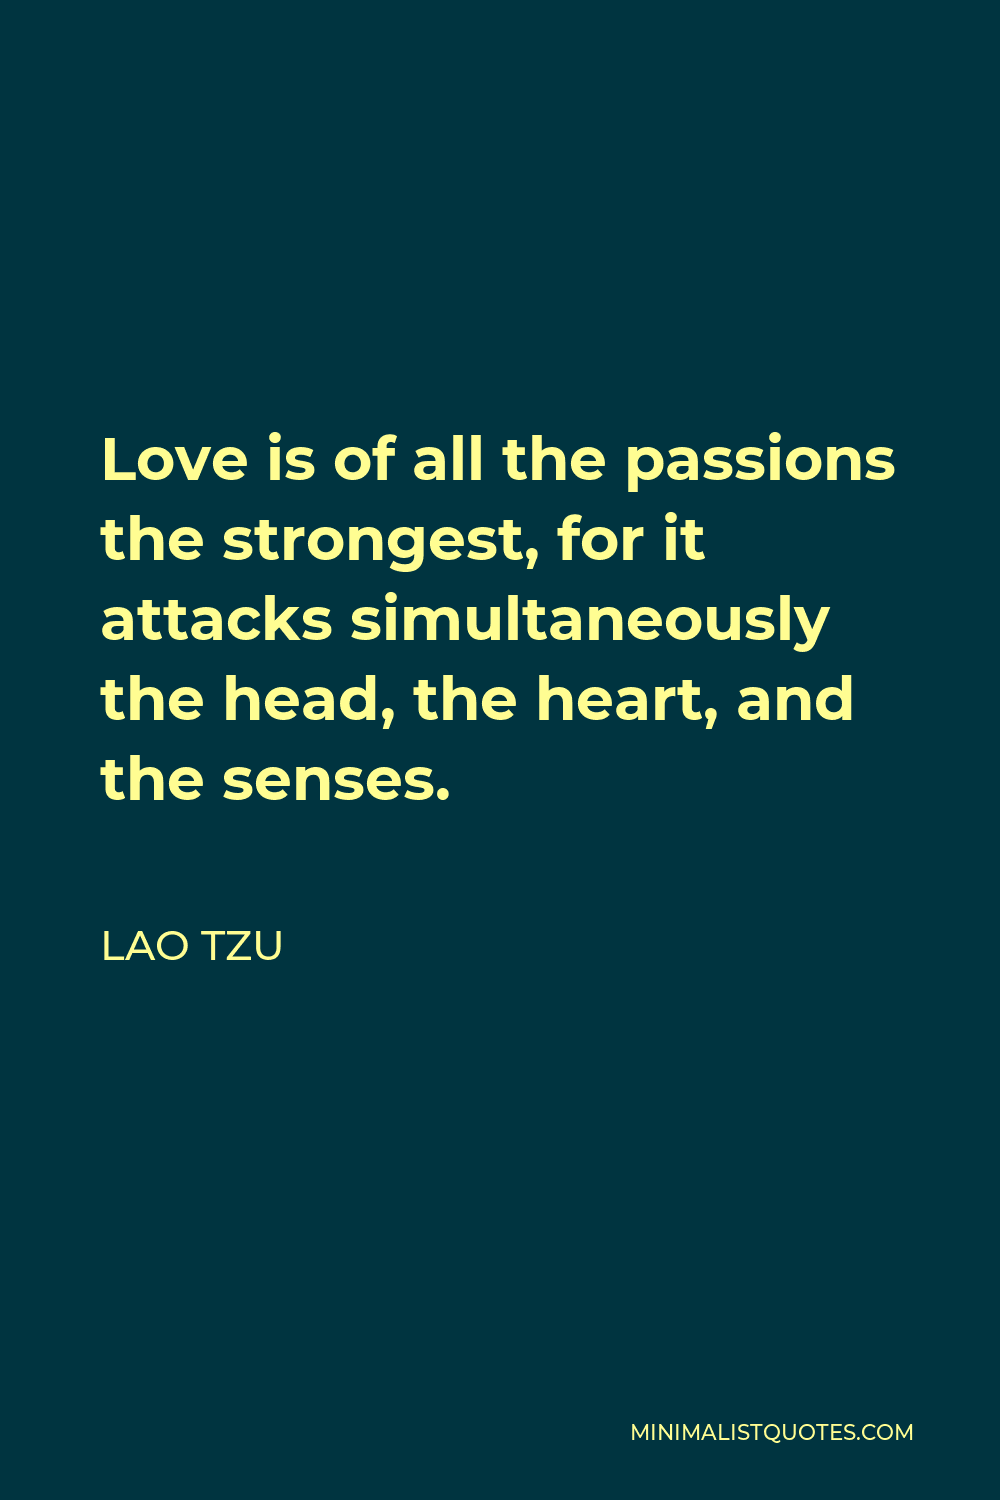 Lao Tzu Quote - Love is of all the passions the strongest, for it attacks simultaneously the head, the heart, and the senses.